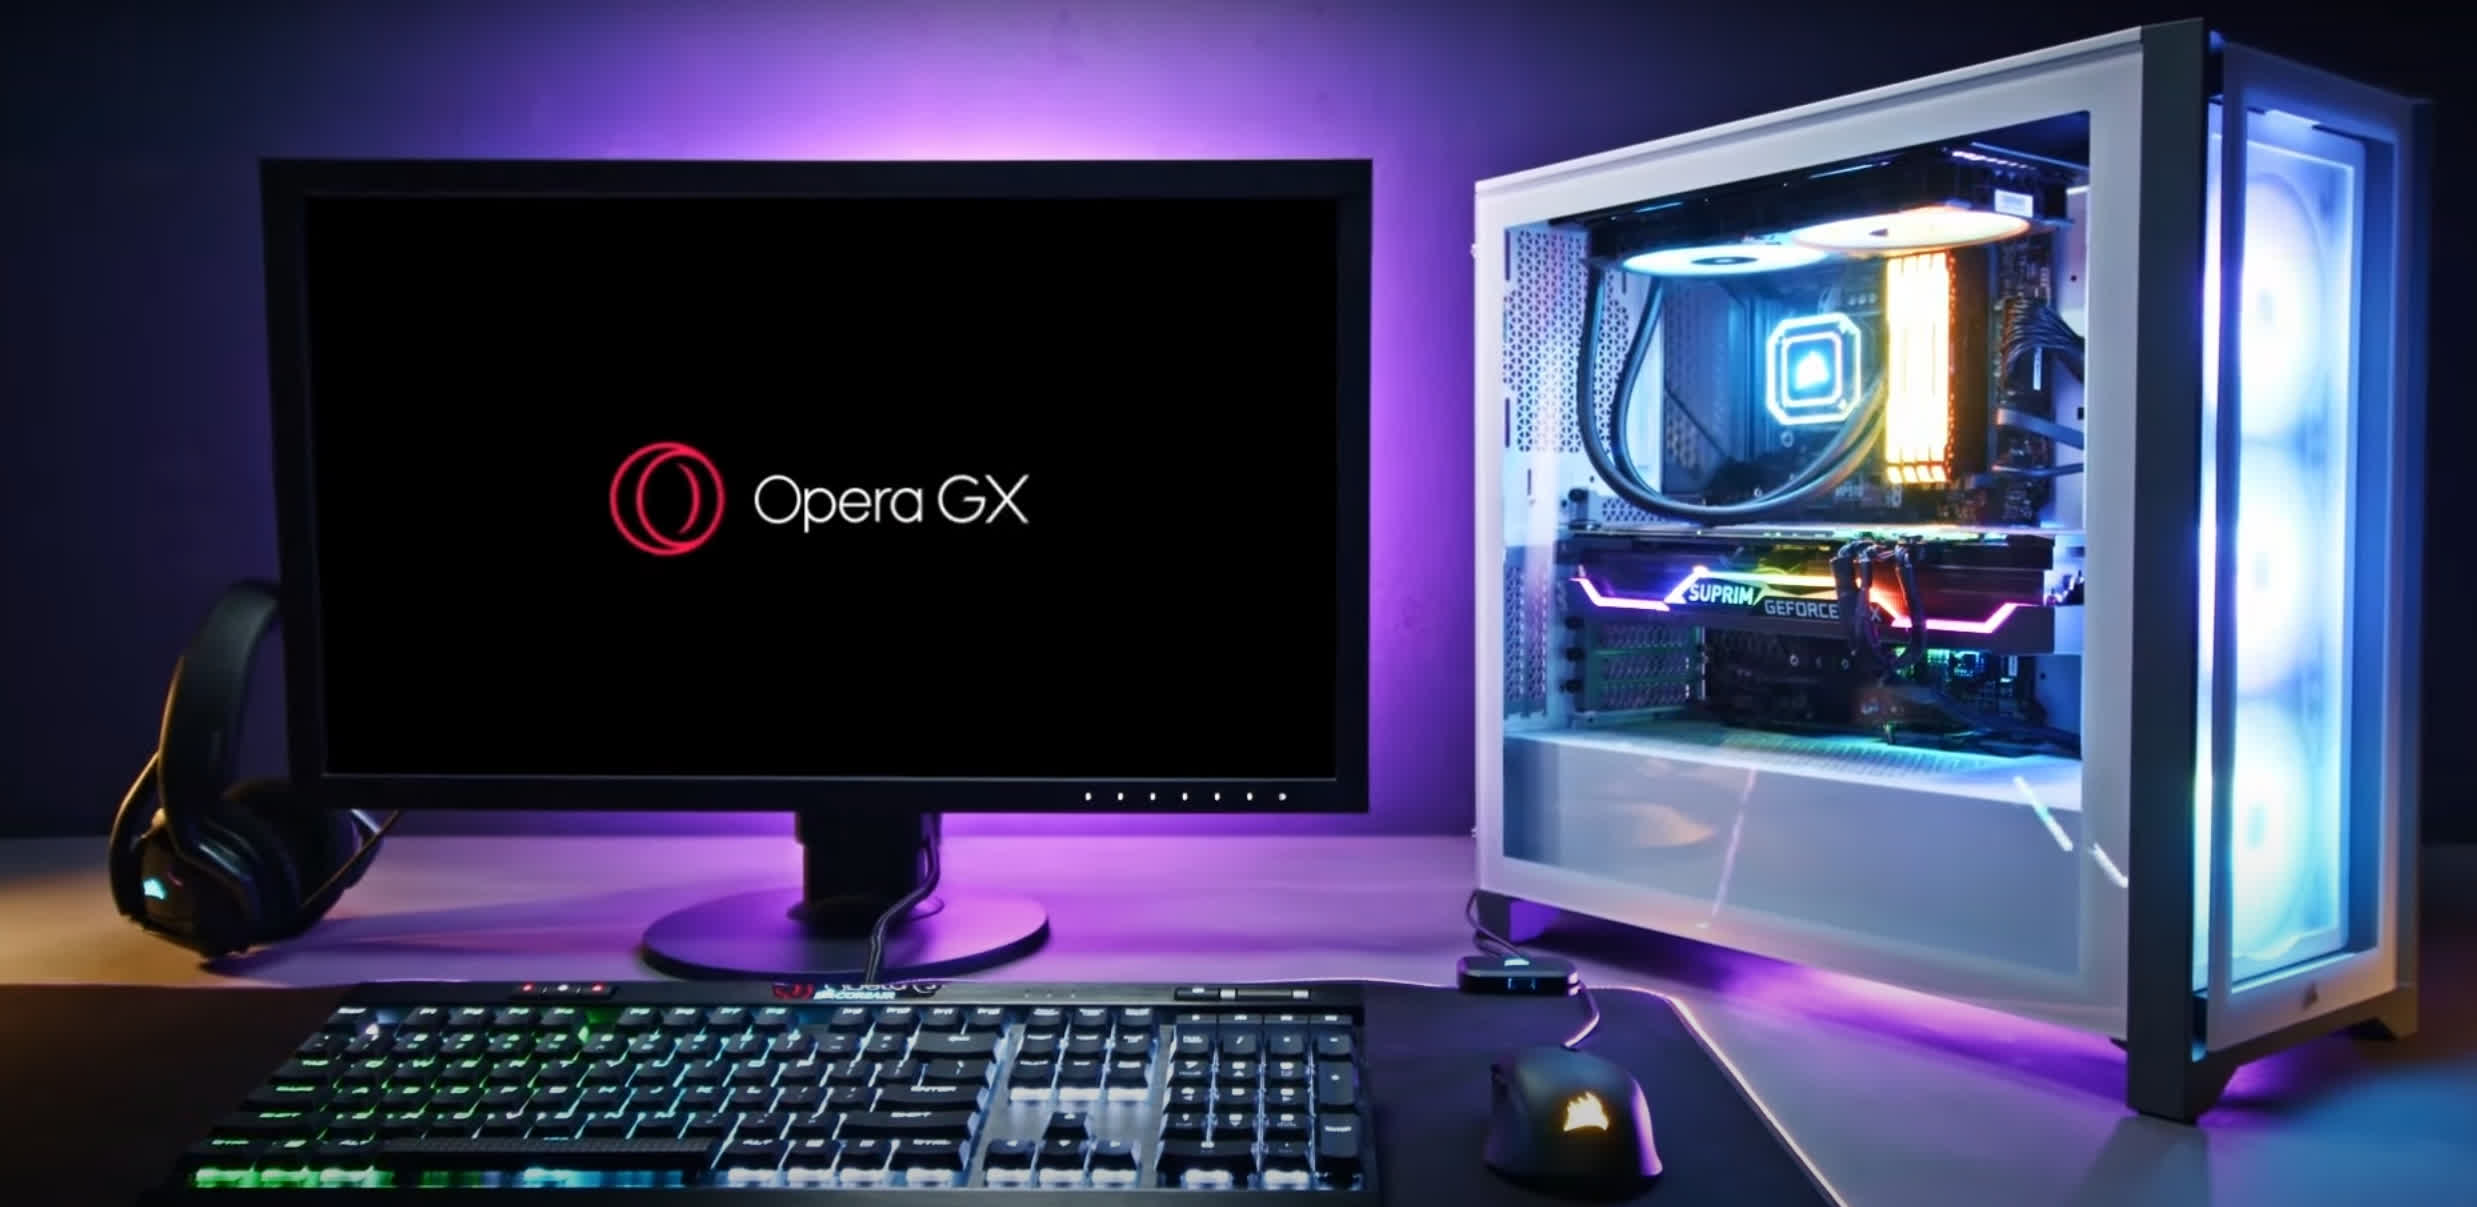 Corsair teams up with Opera to integrate RGB lighting with a web browser